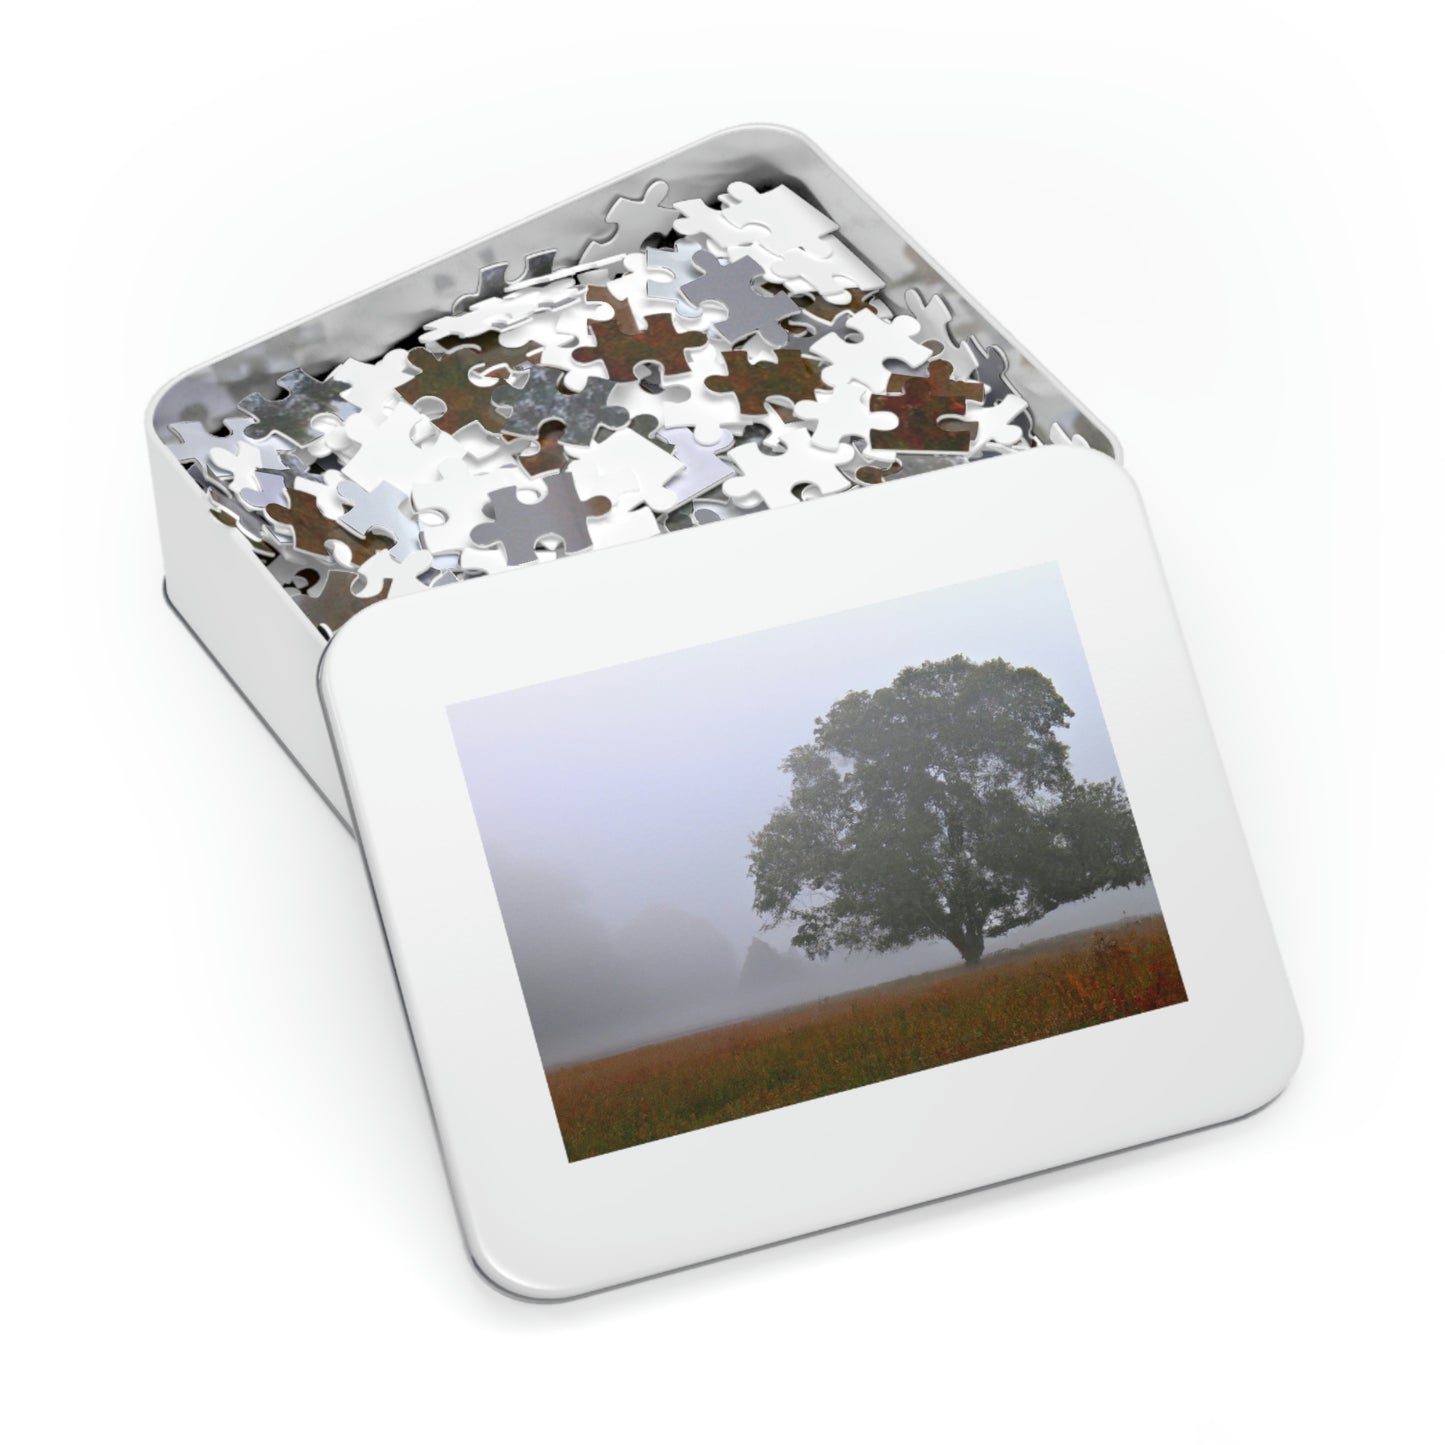 The Lonely Tree in the Foggy Meadow - The Alien Jigsaw Puzzle